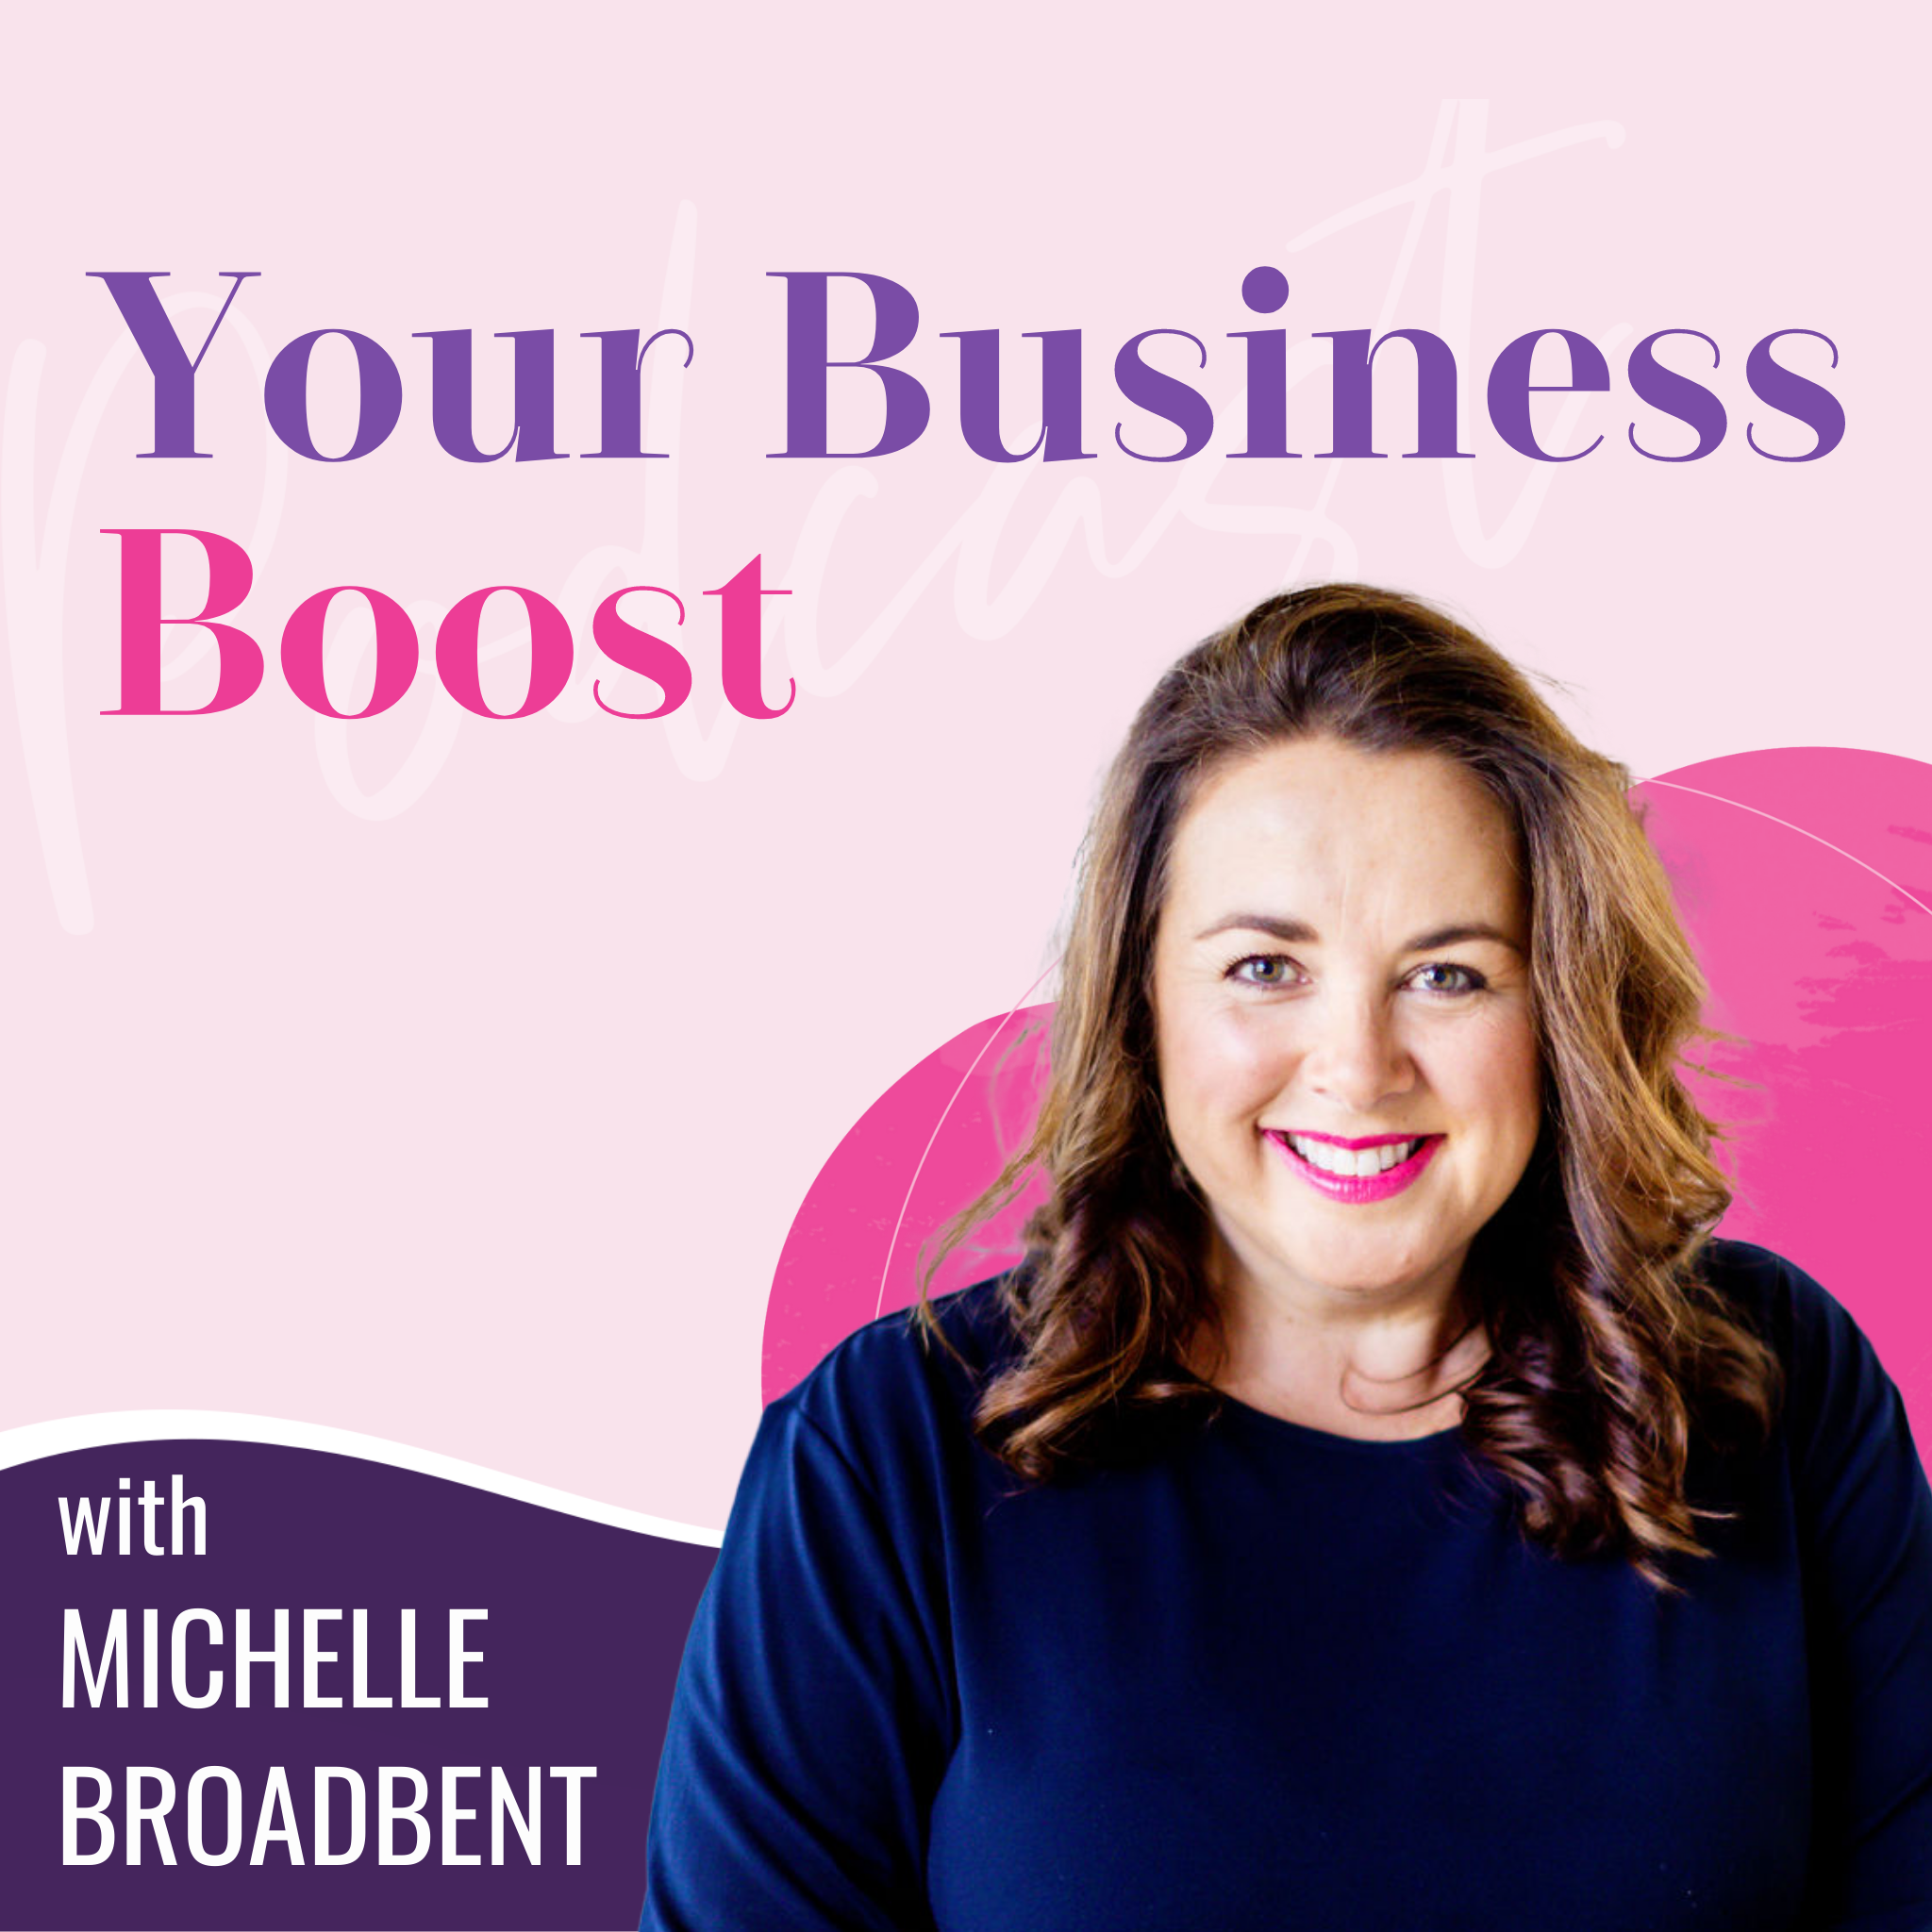 Part 3 : Holiday Proof Your Business - If not you - then who?